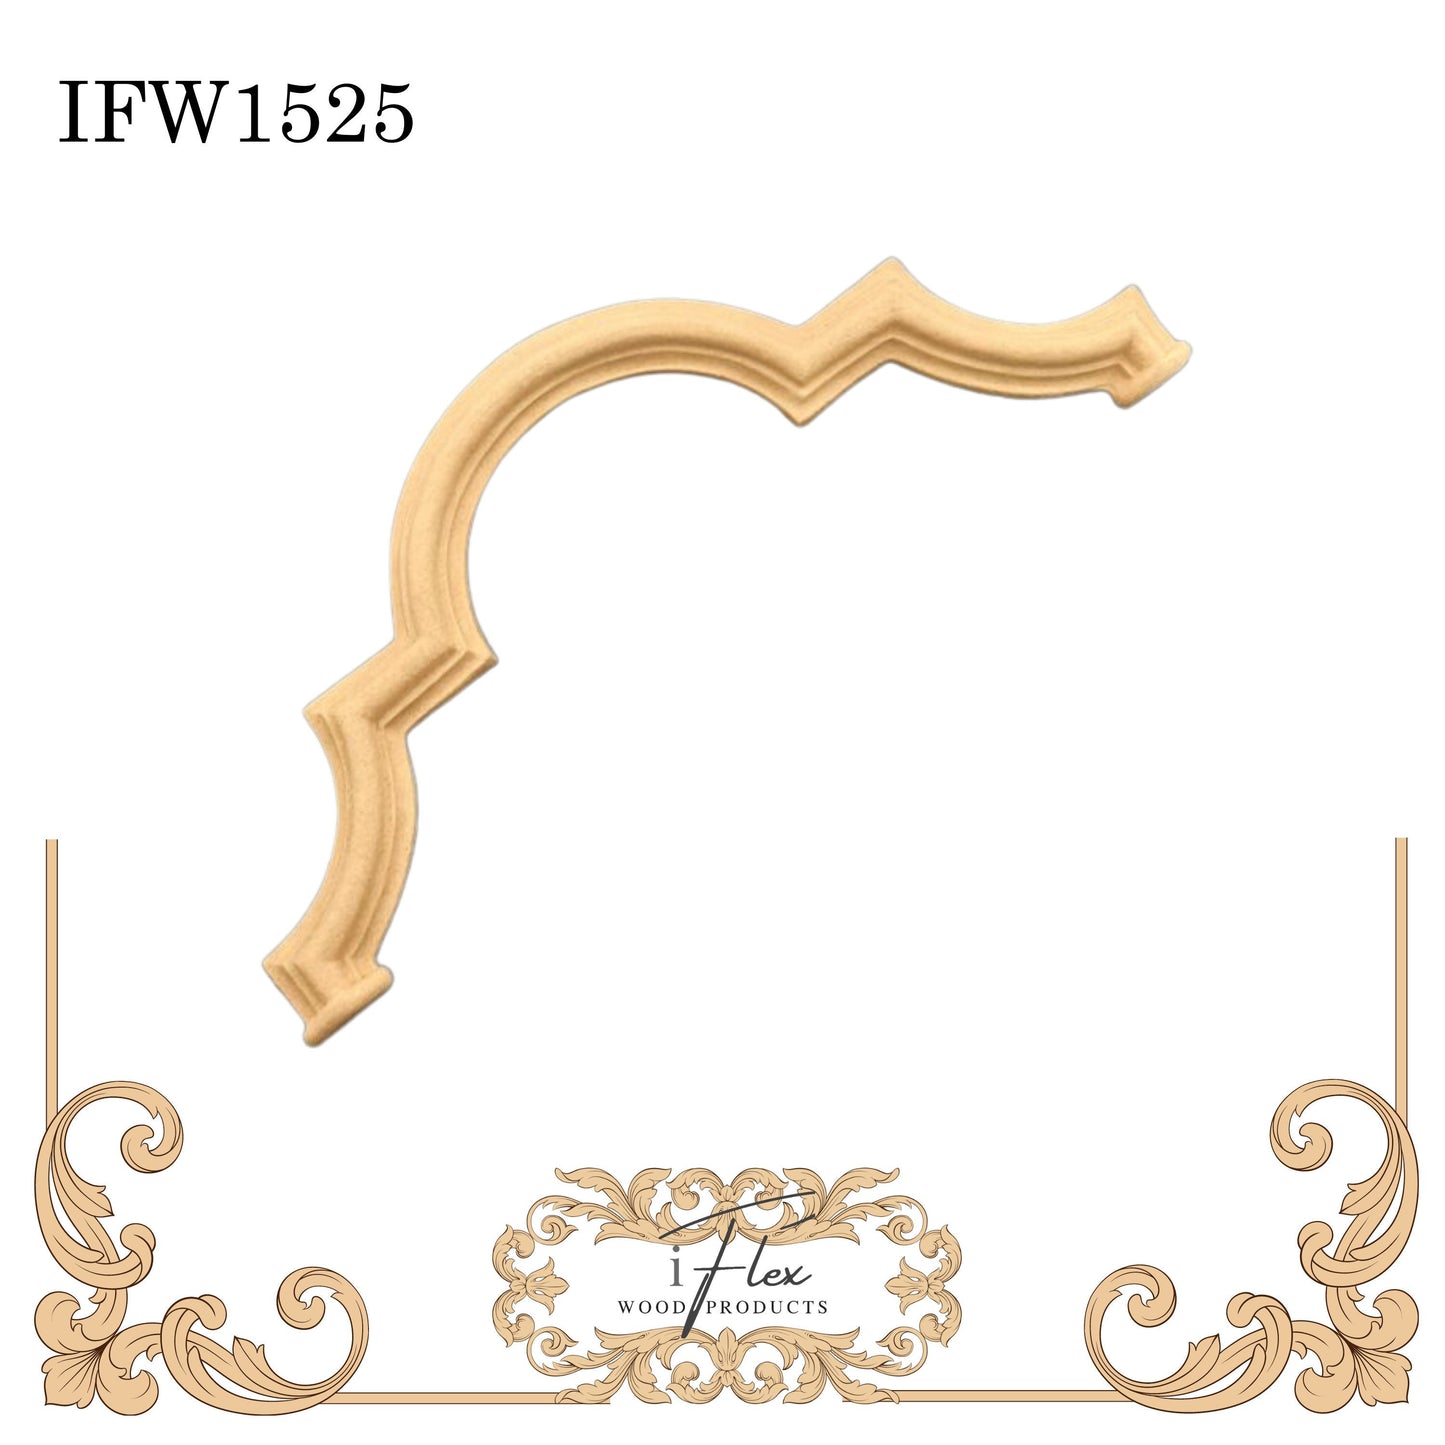 IFW 1525 iFlex Wood Products, bendable mouldings, flexible, wooden appliques, architectural piece